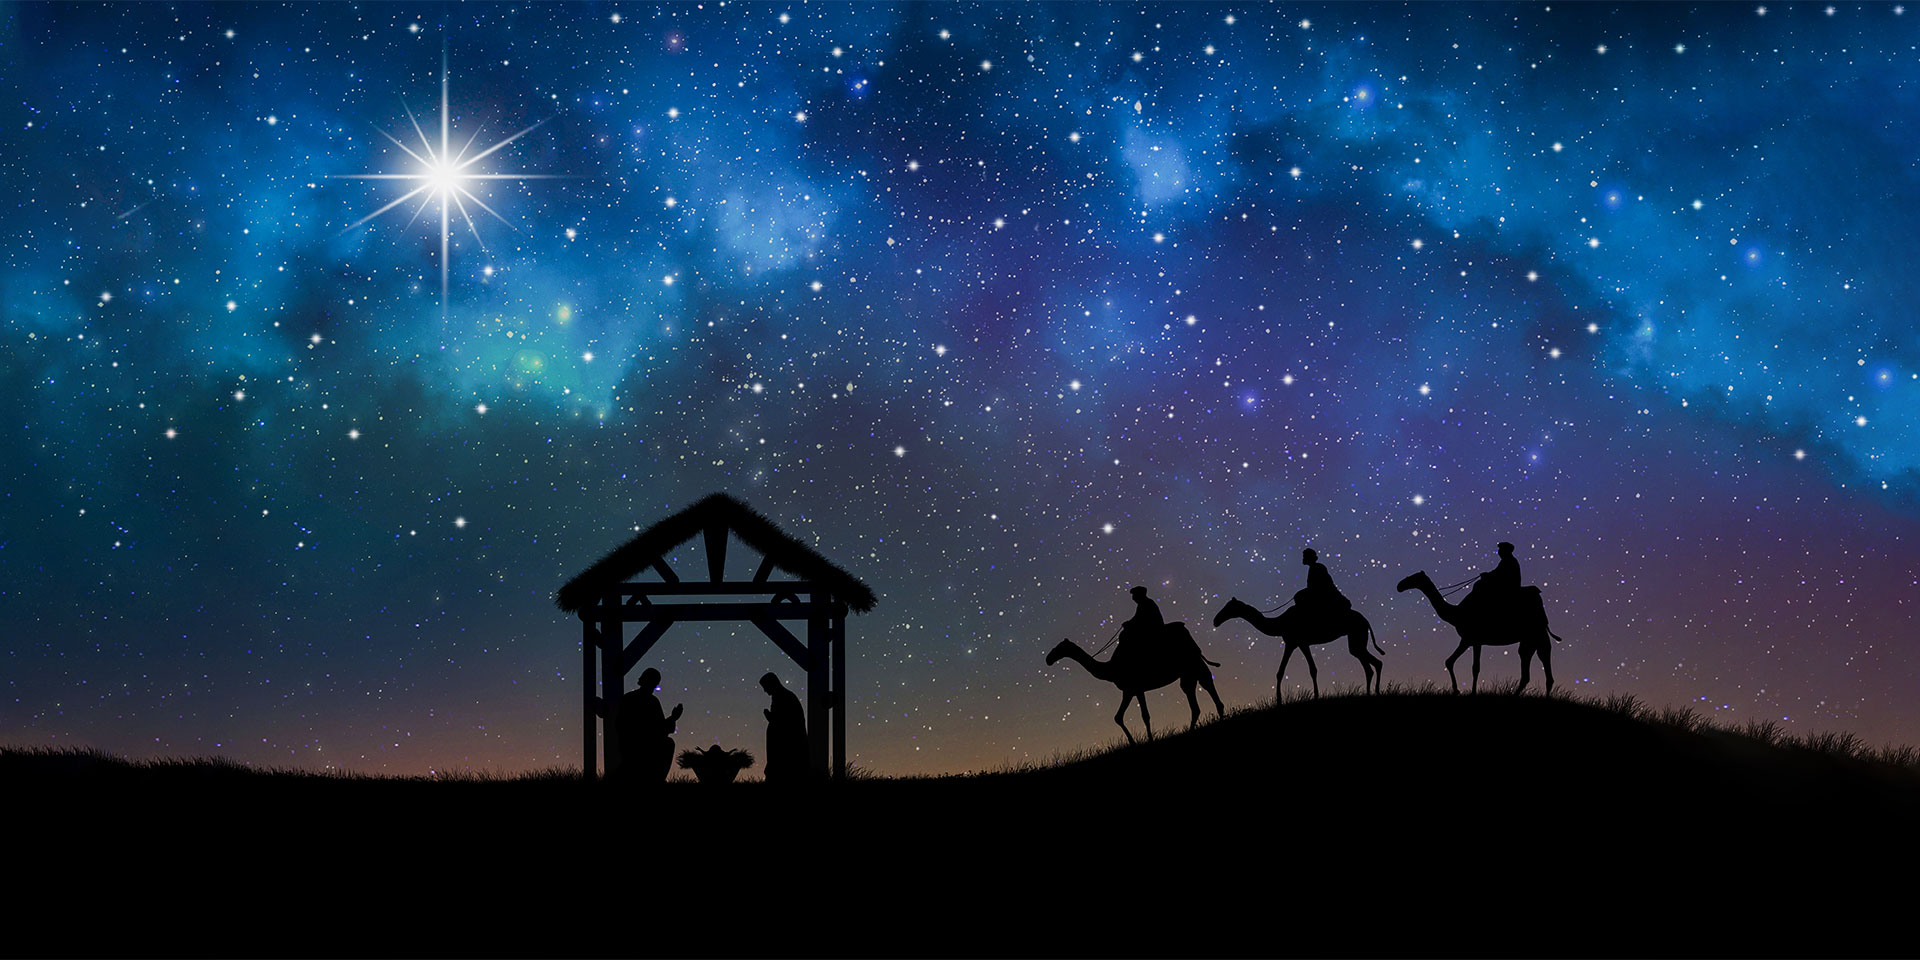 The birth of Jesus and its impact on the world